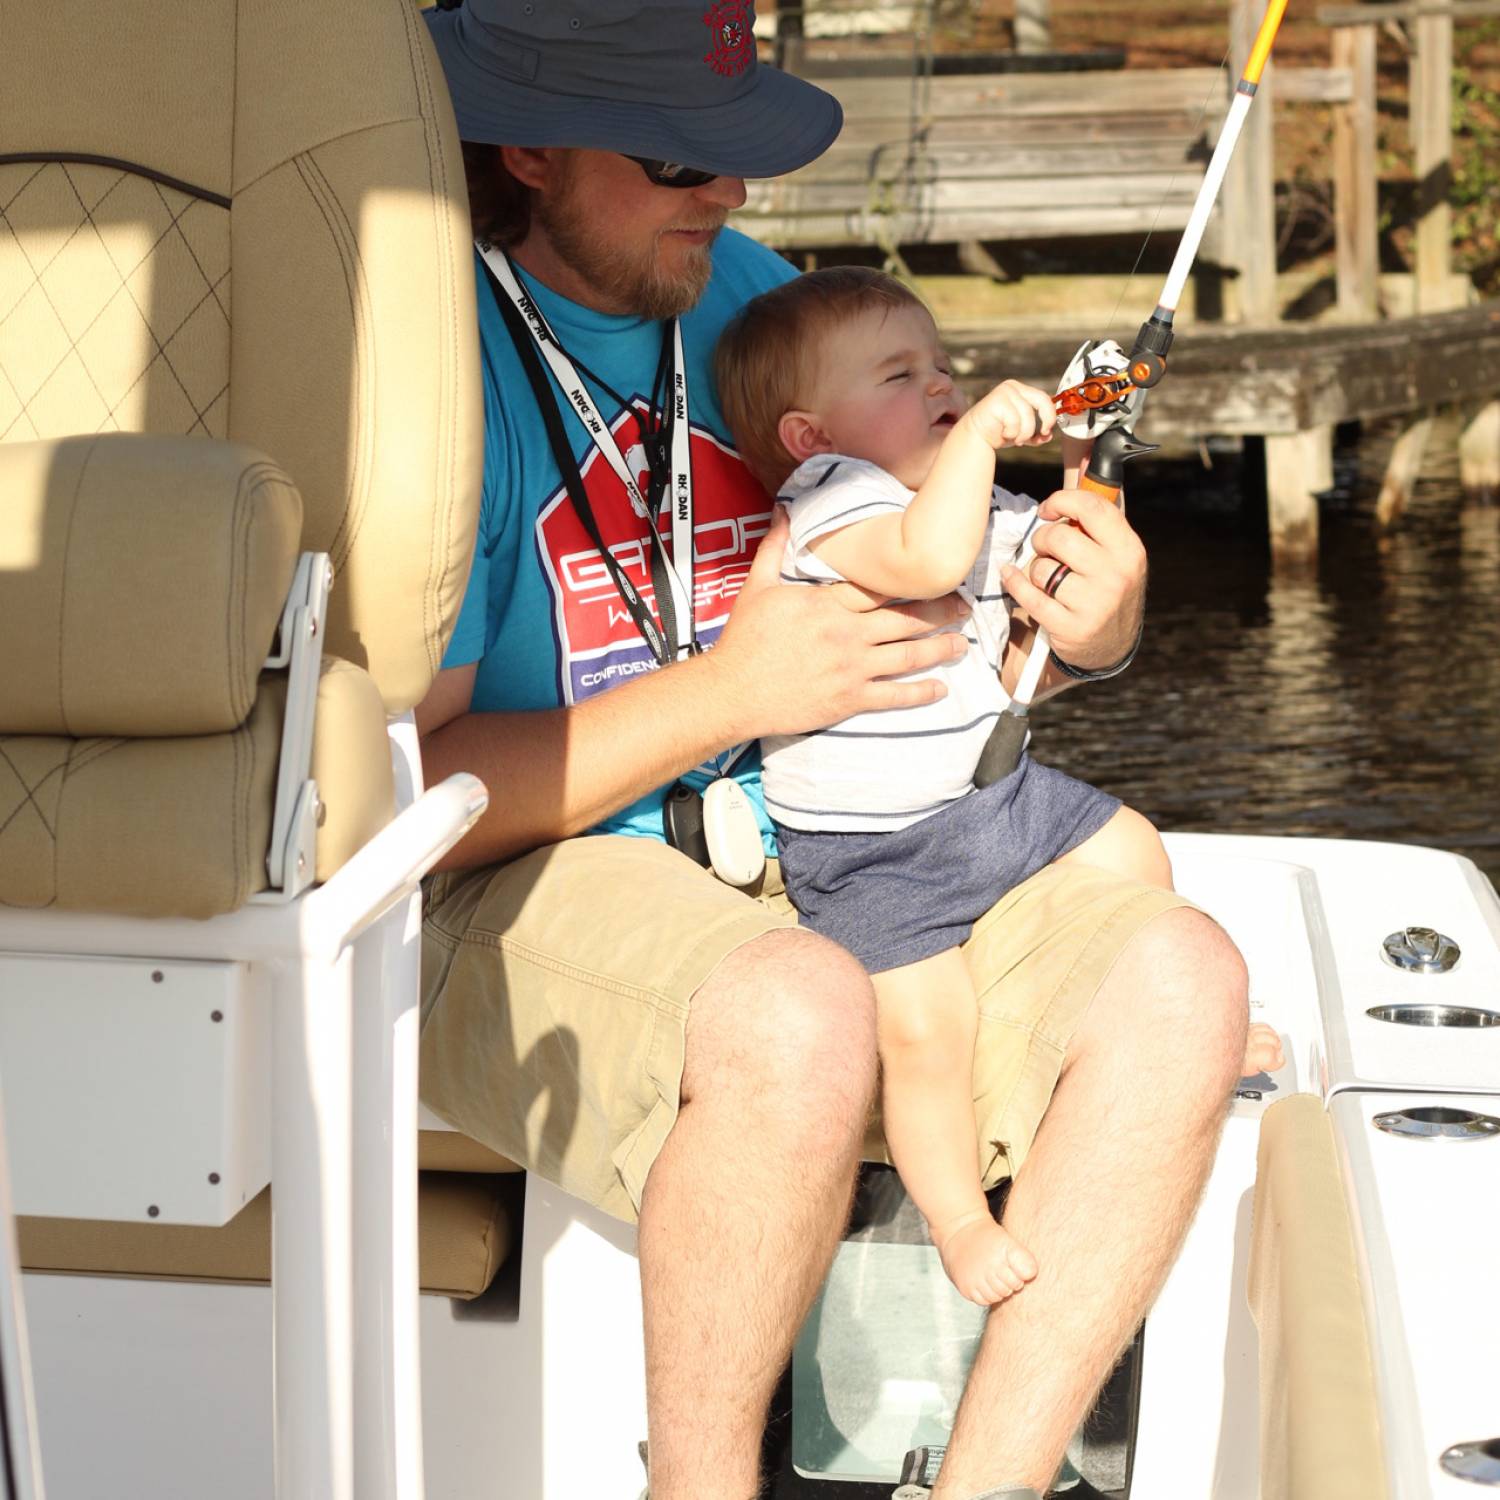 My son Jax’s first time on the boat. He caught his first fish.